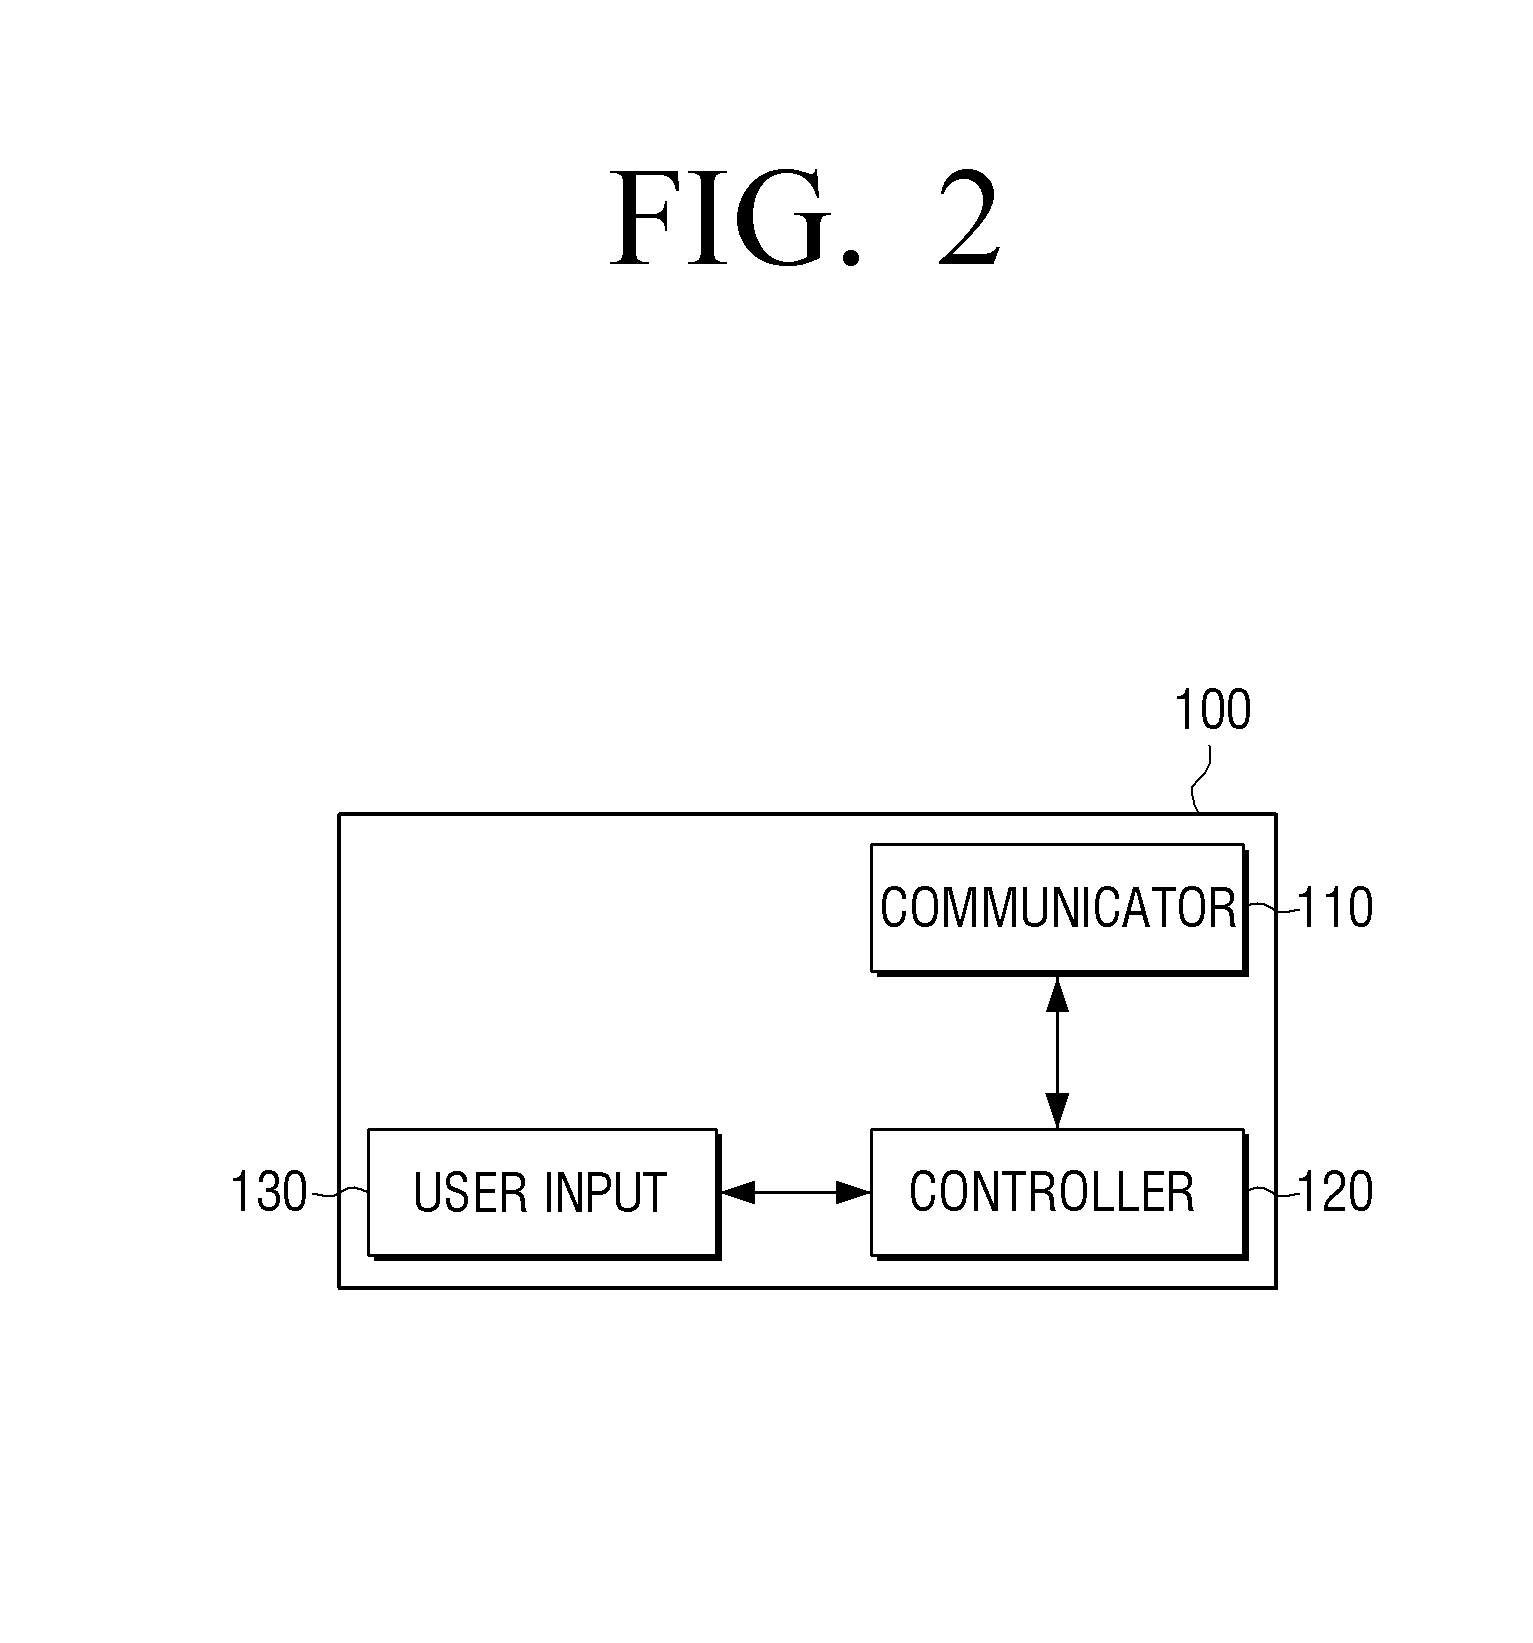 Remote control apparatus, method and multimedia system for volume control